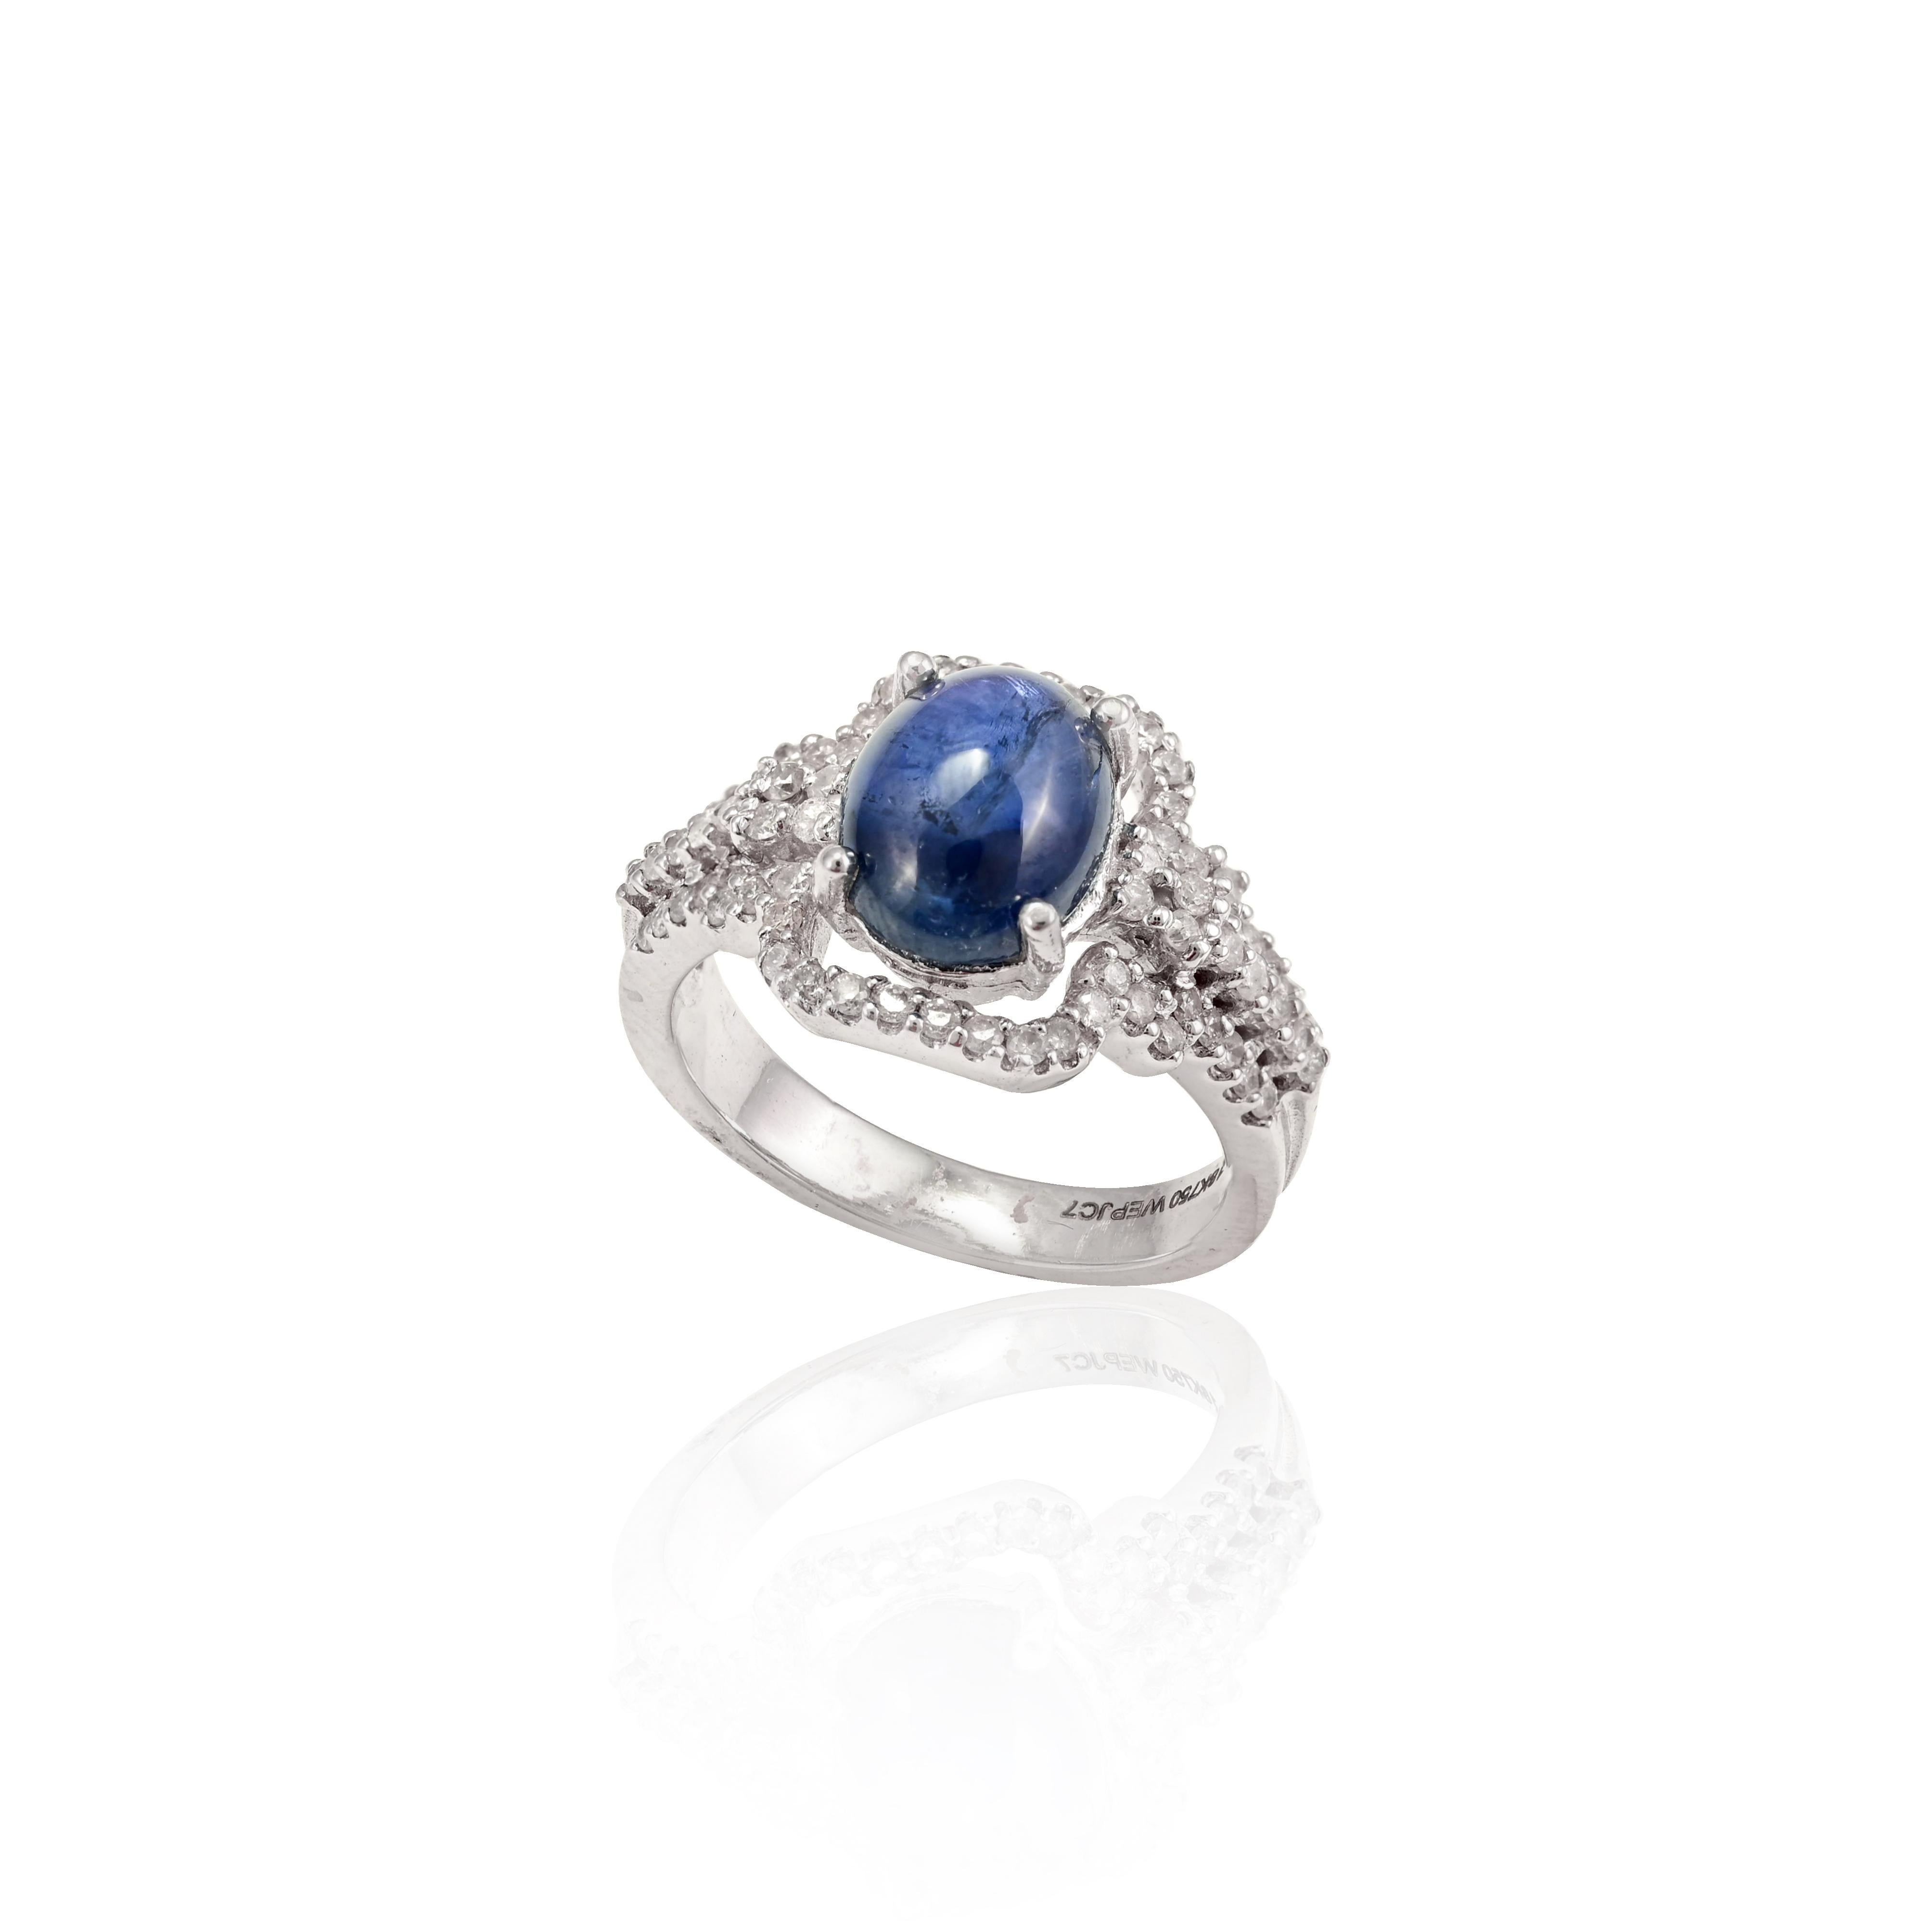 For Sale:  3.01 Ct Blue Sapphire and Diamond Engagement Ring Made 18k Solid White Gold 5